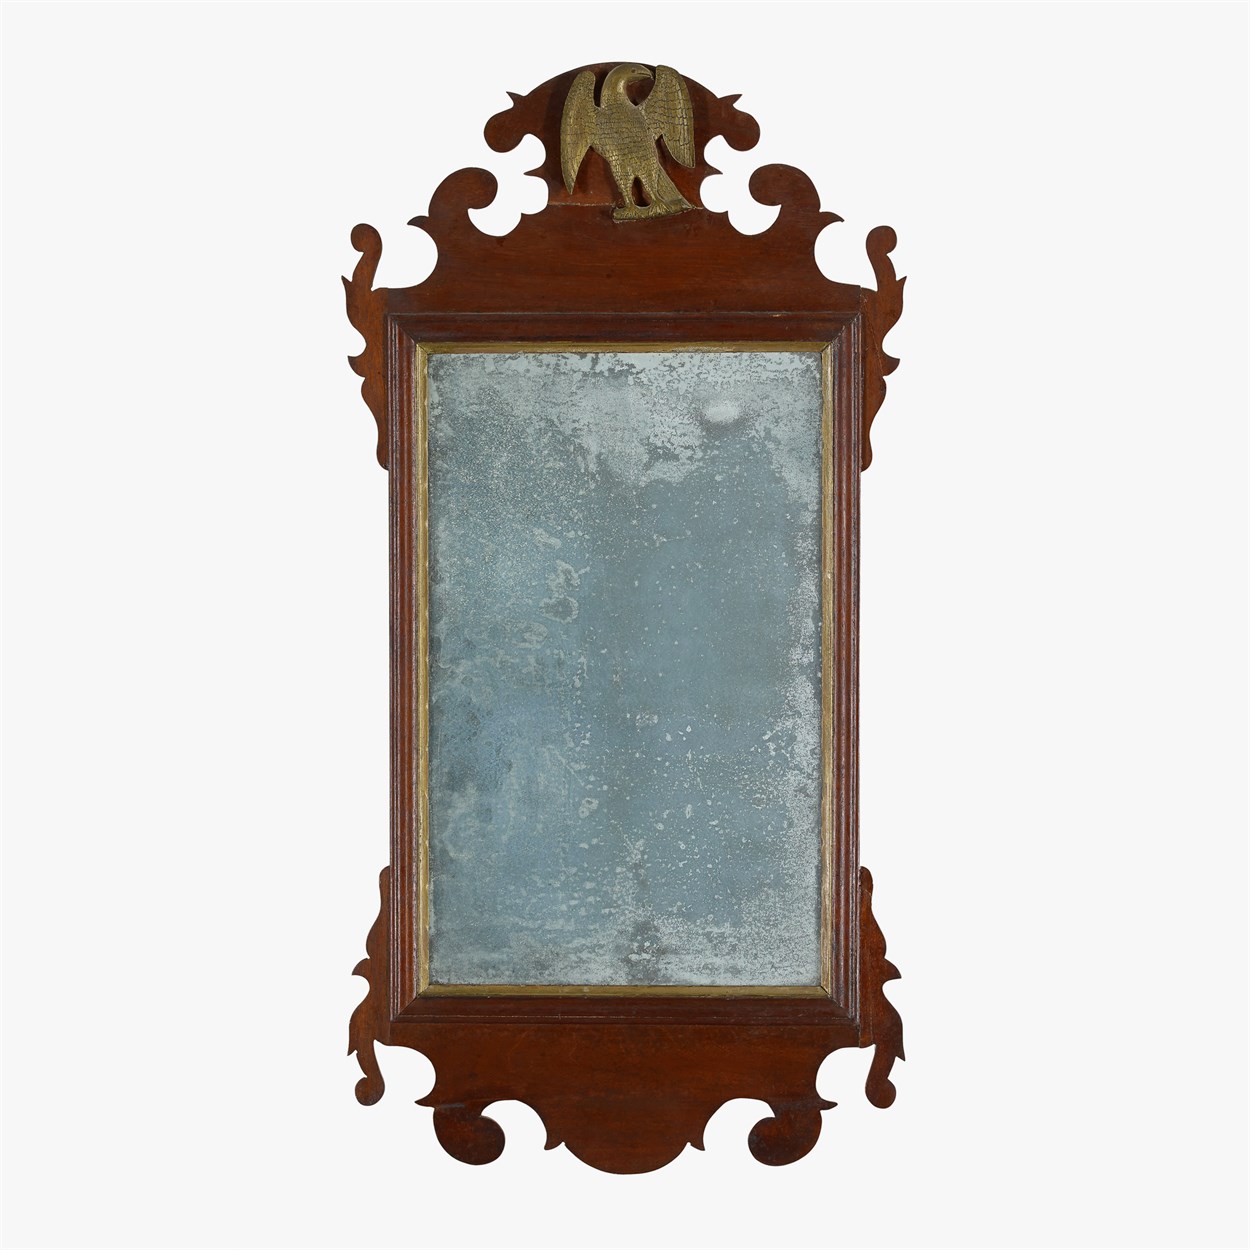 Lot 8 - Chippendale-style mahogany and giltwood looking glass